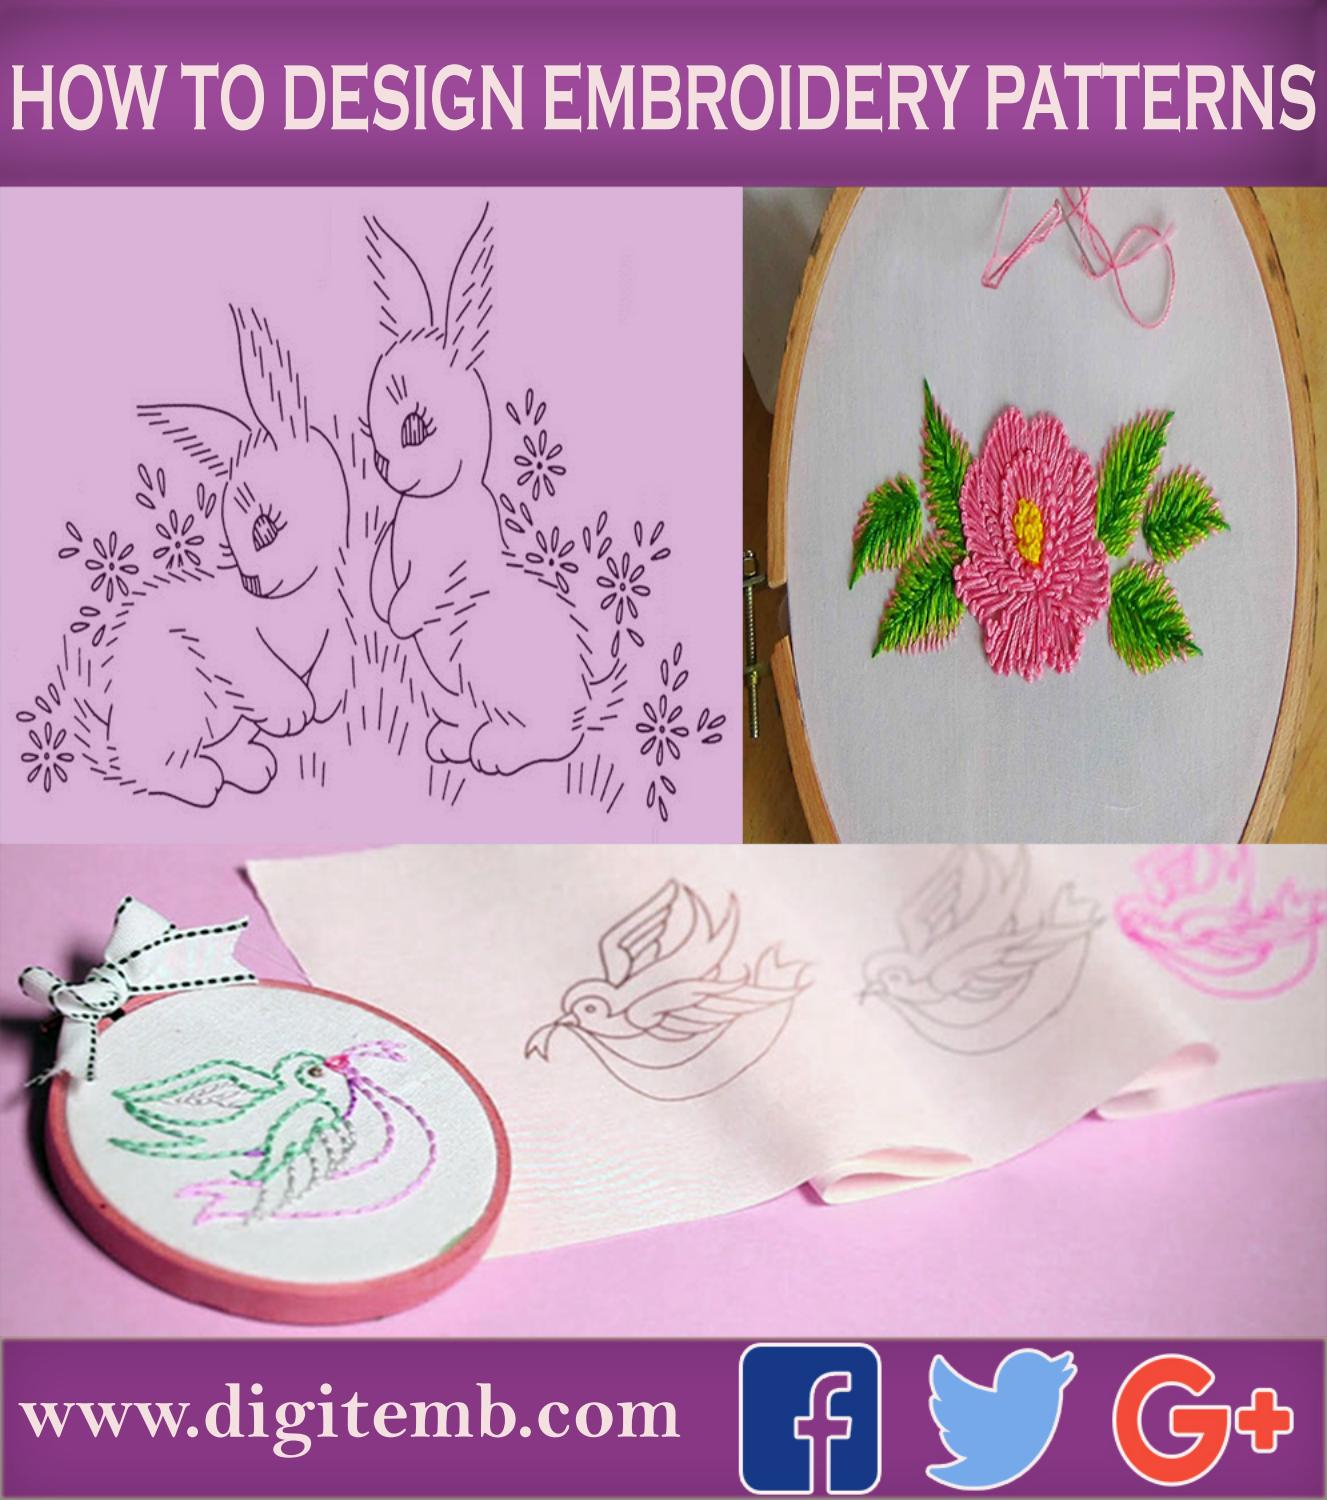 How To Design Embroidery Patterns How To Design Embroidery Patterns Ida Hill Issuu